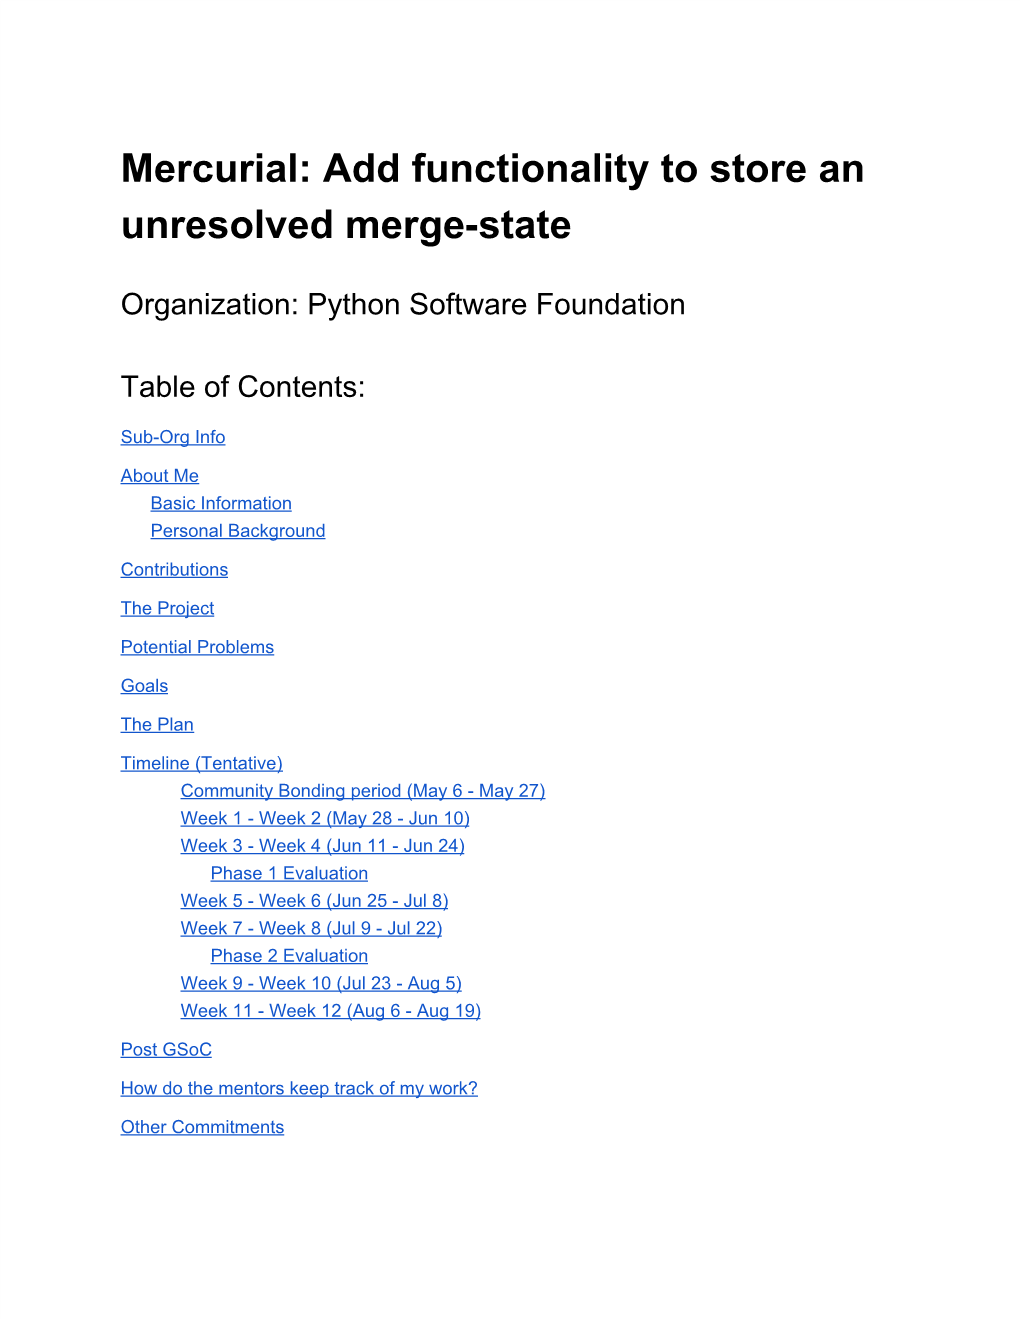 Mercurial: Add Functionality to Store an Unresolved Merge-State